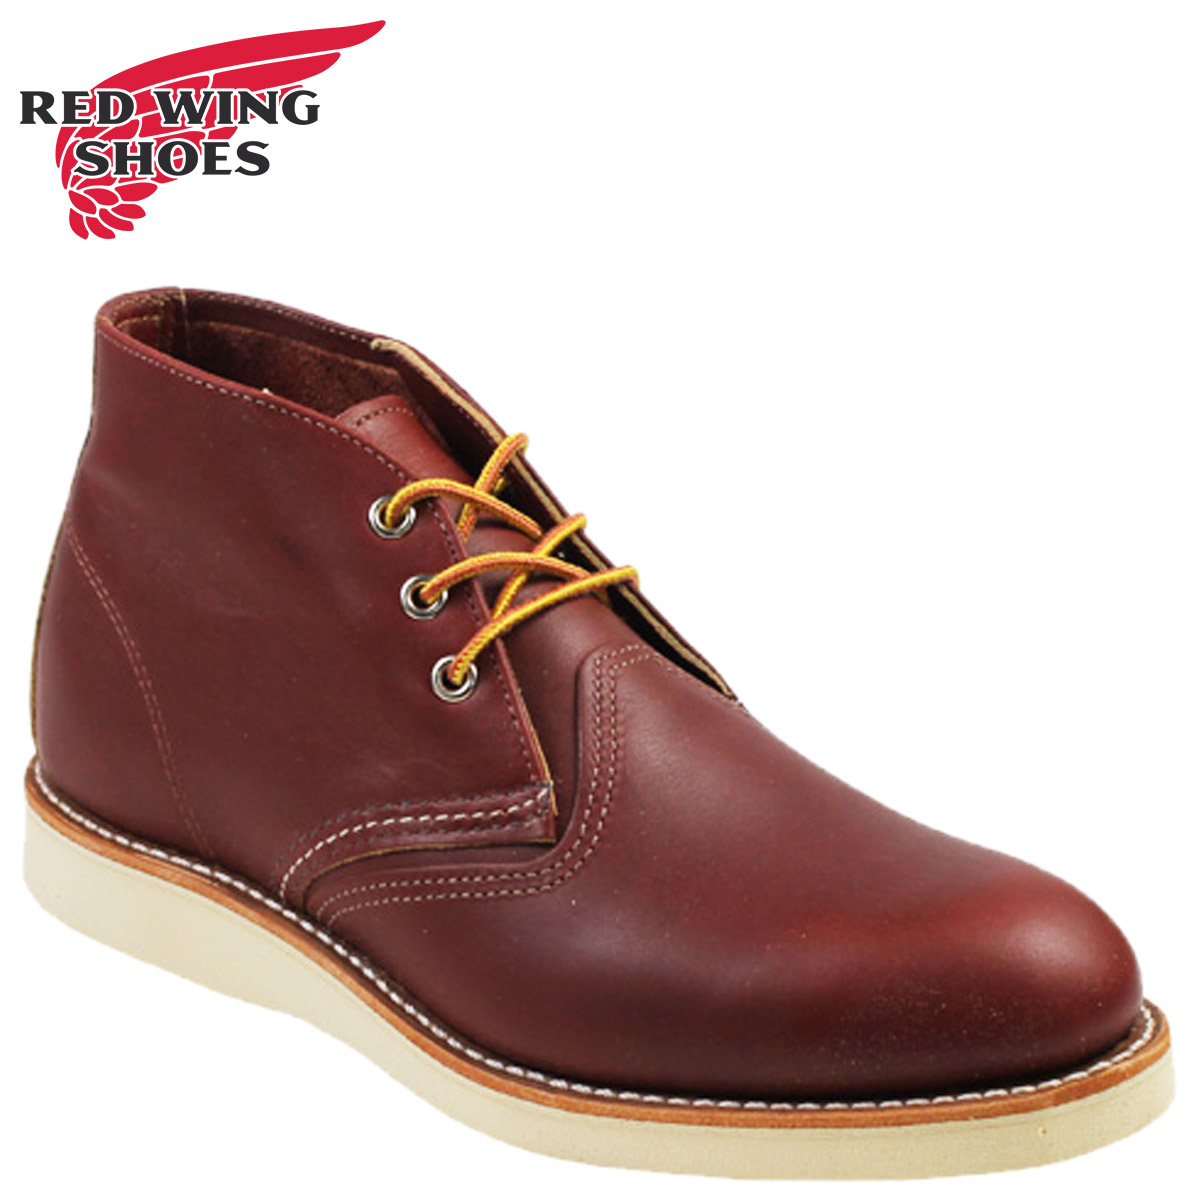 red wing wellington work boots